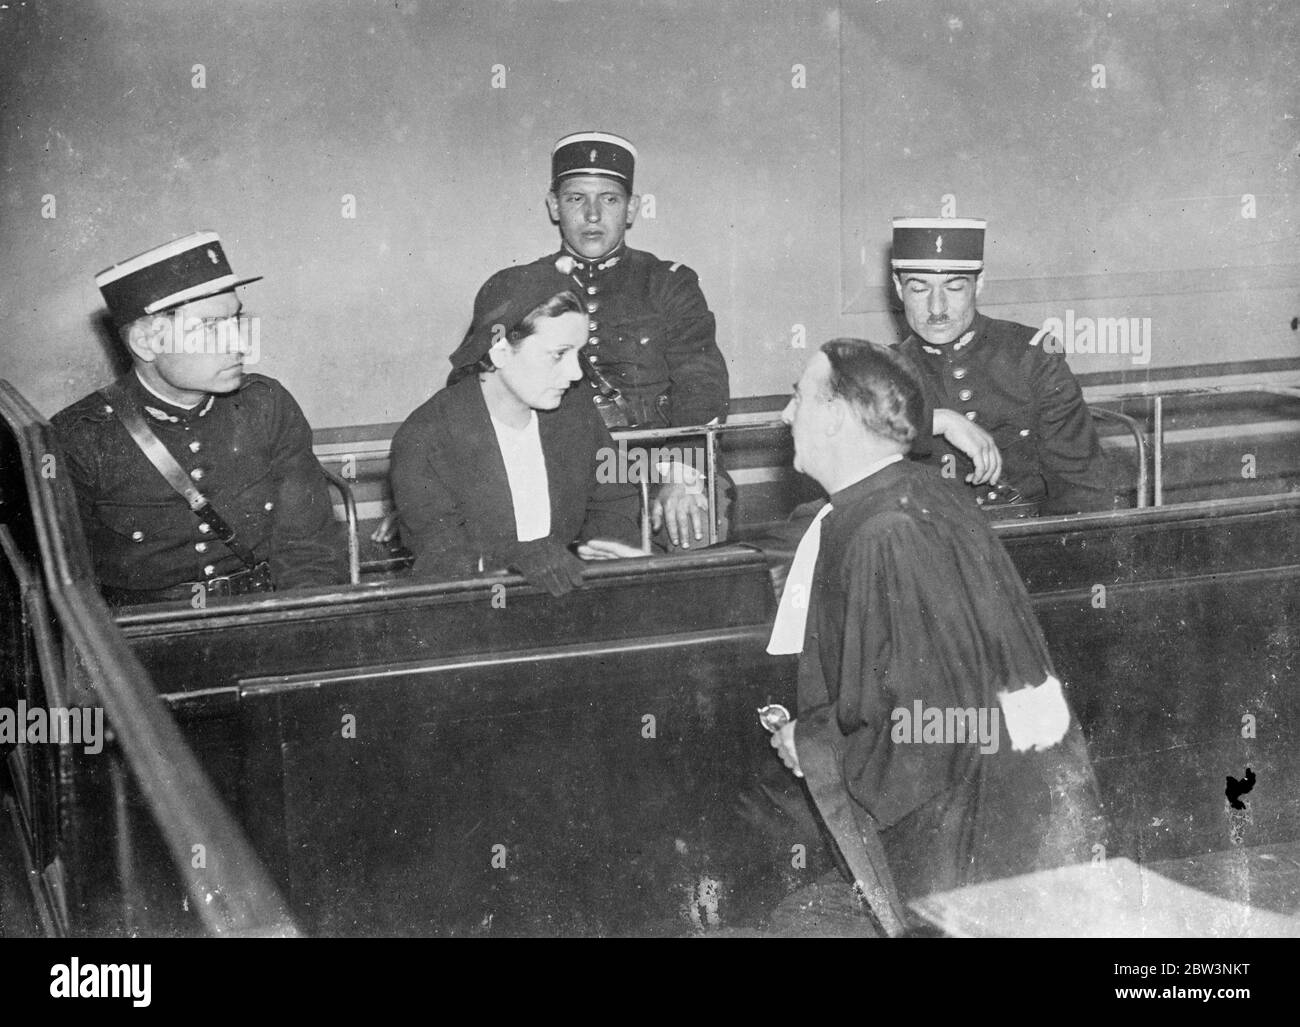 Woman on trial for killing lover , former cycling champion . The trial has opened at Versailles Assizes , France , of Camille Tharault . She is accused of the murder of Henri Palissier , former champion cyclist , who was killed during a dinner party at his own house . Mme Tharault was living with Pelissier as his mistress at the village of Fourcherelles , near versailles . They entertained to dinner the women ' s sister , Pelissier ' s legitimate daughter aged 17 , and a friend . the champion ' s brother Francis was also present . After a heated quarrel between Pelissier and his mistress ' s , Stock Photo